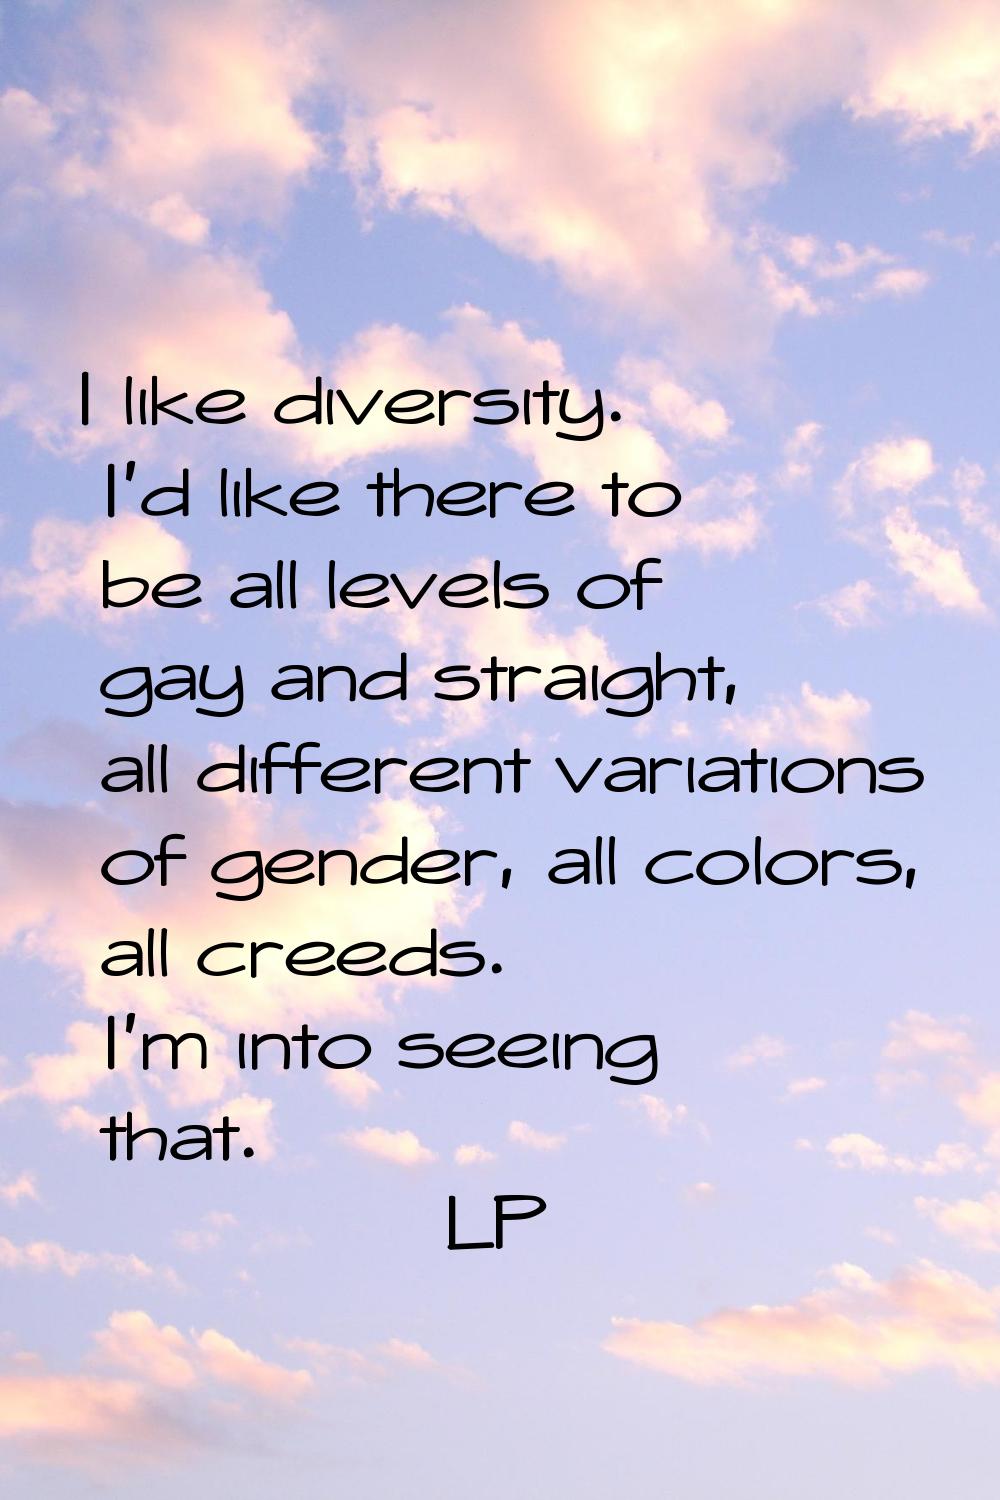 I like diversity. I'd like there to be all levels of gay and straight, all different variations of 